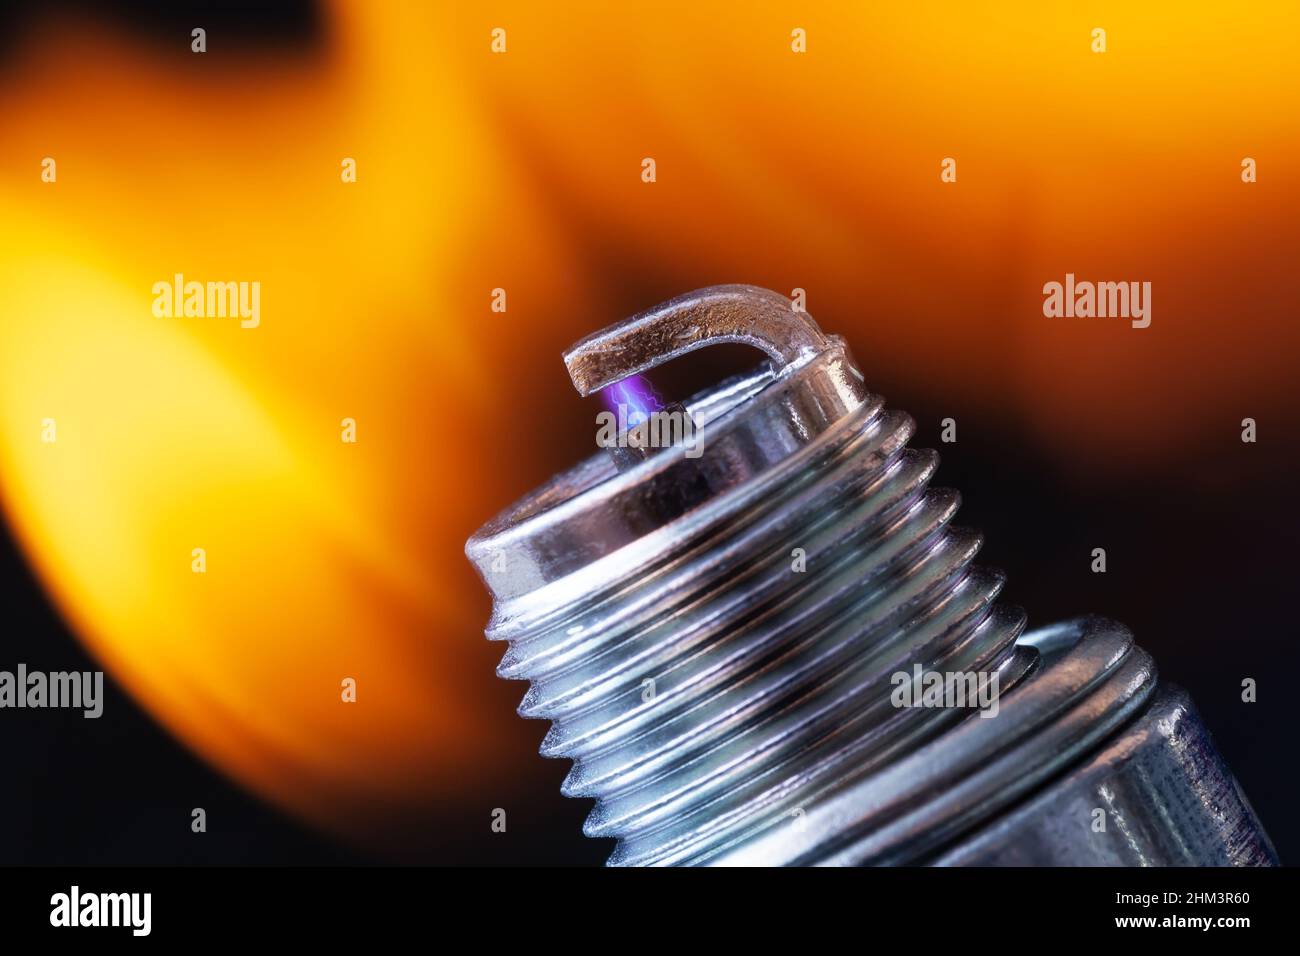 A spark in the spark plug of a gasoline engine ignites the fuel mixture. Macro photography. Stock Photo